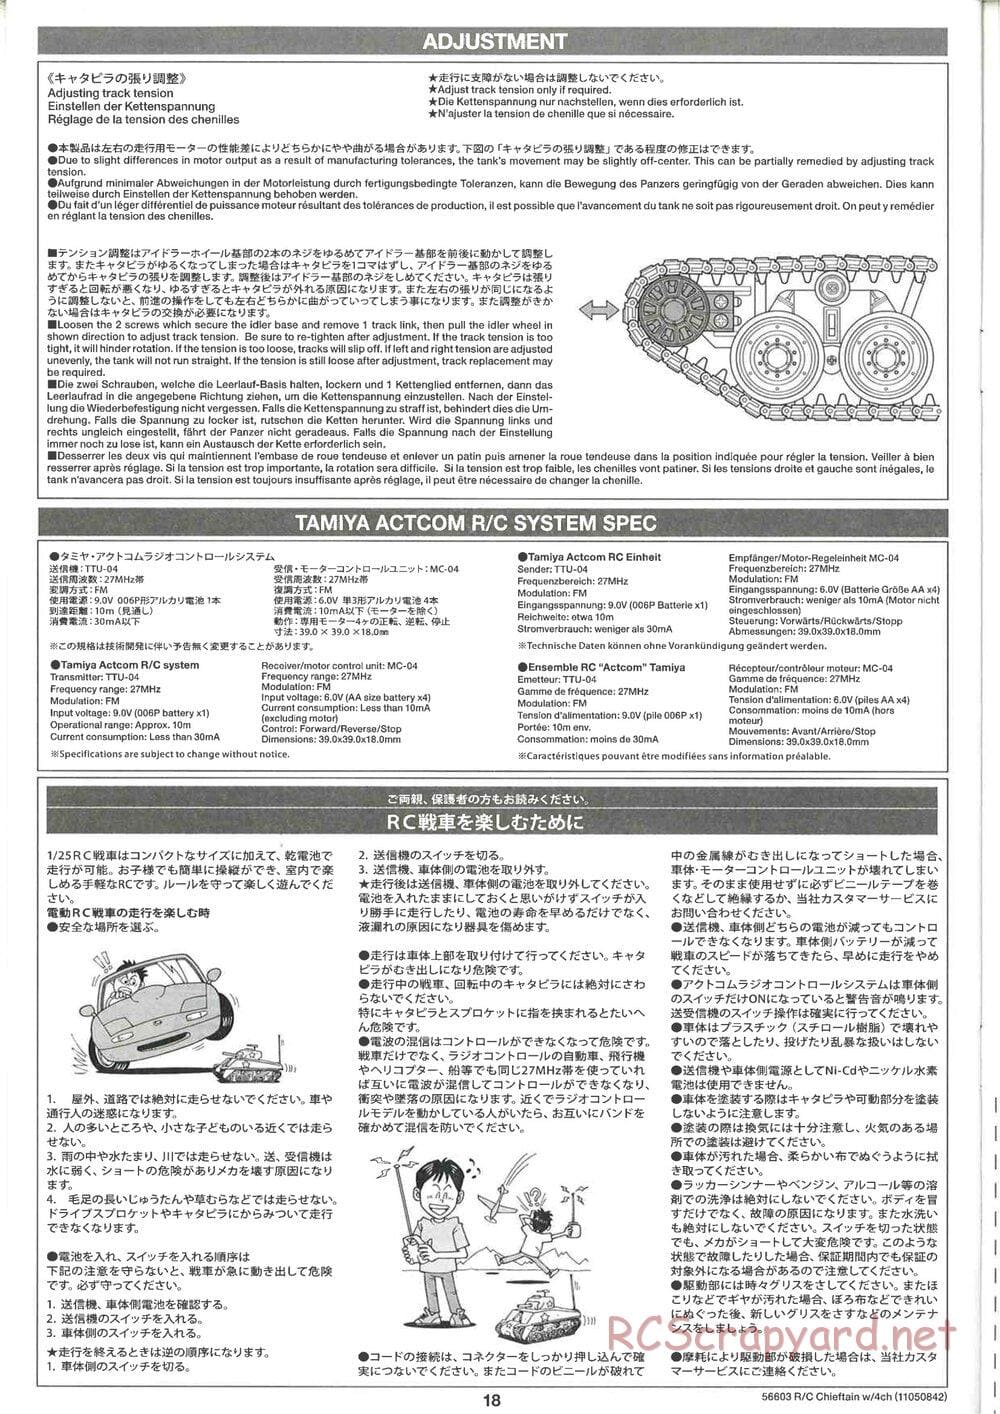 Tamiya - British Army Battle Tank Cheiftain - 1/25 Scale Chassis - Manual - Page 18